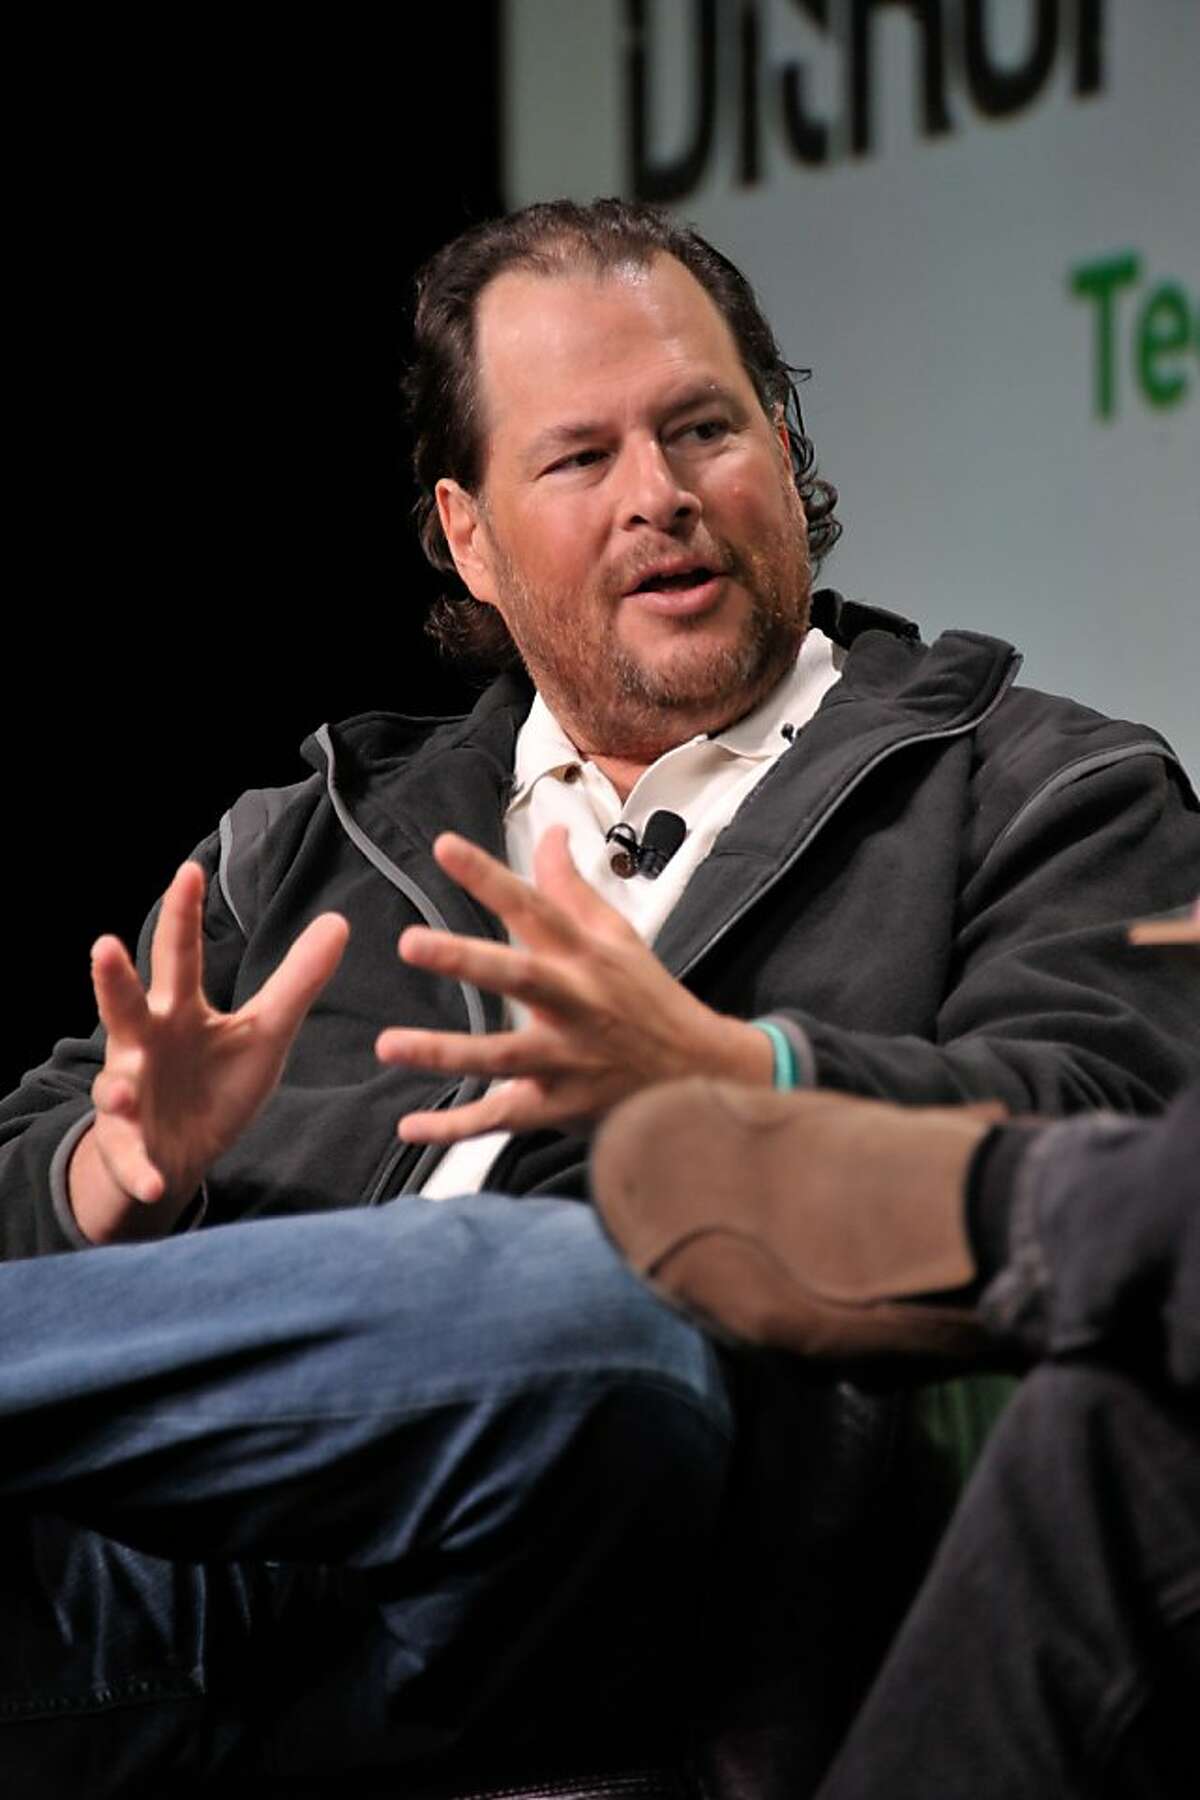 SAN FRANCISCO, CA - SEPTEMBER 10: Mark Benioff of Salesforce.com attends Day 2 of TechCrunch Disrupt SF 2013 at San Francisco Design Center on September 10, 2013 in San Francisco, California. (Photo by Steve Jennings/Getty Images for TechCrunch)